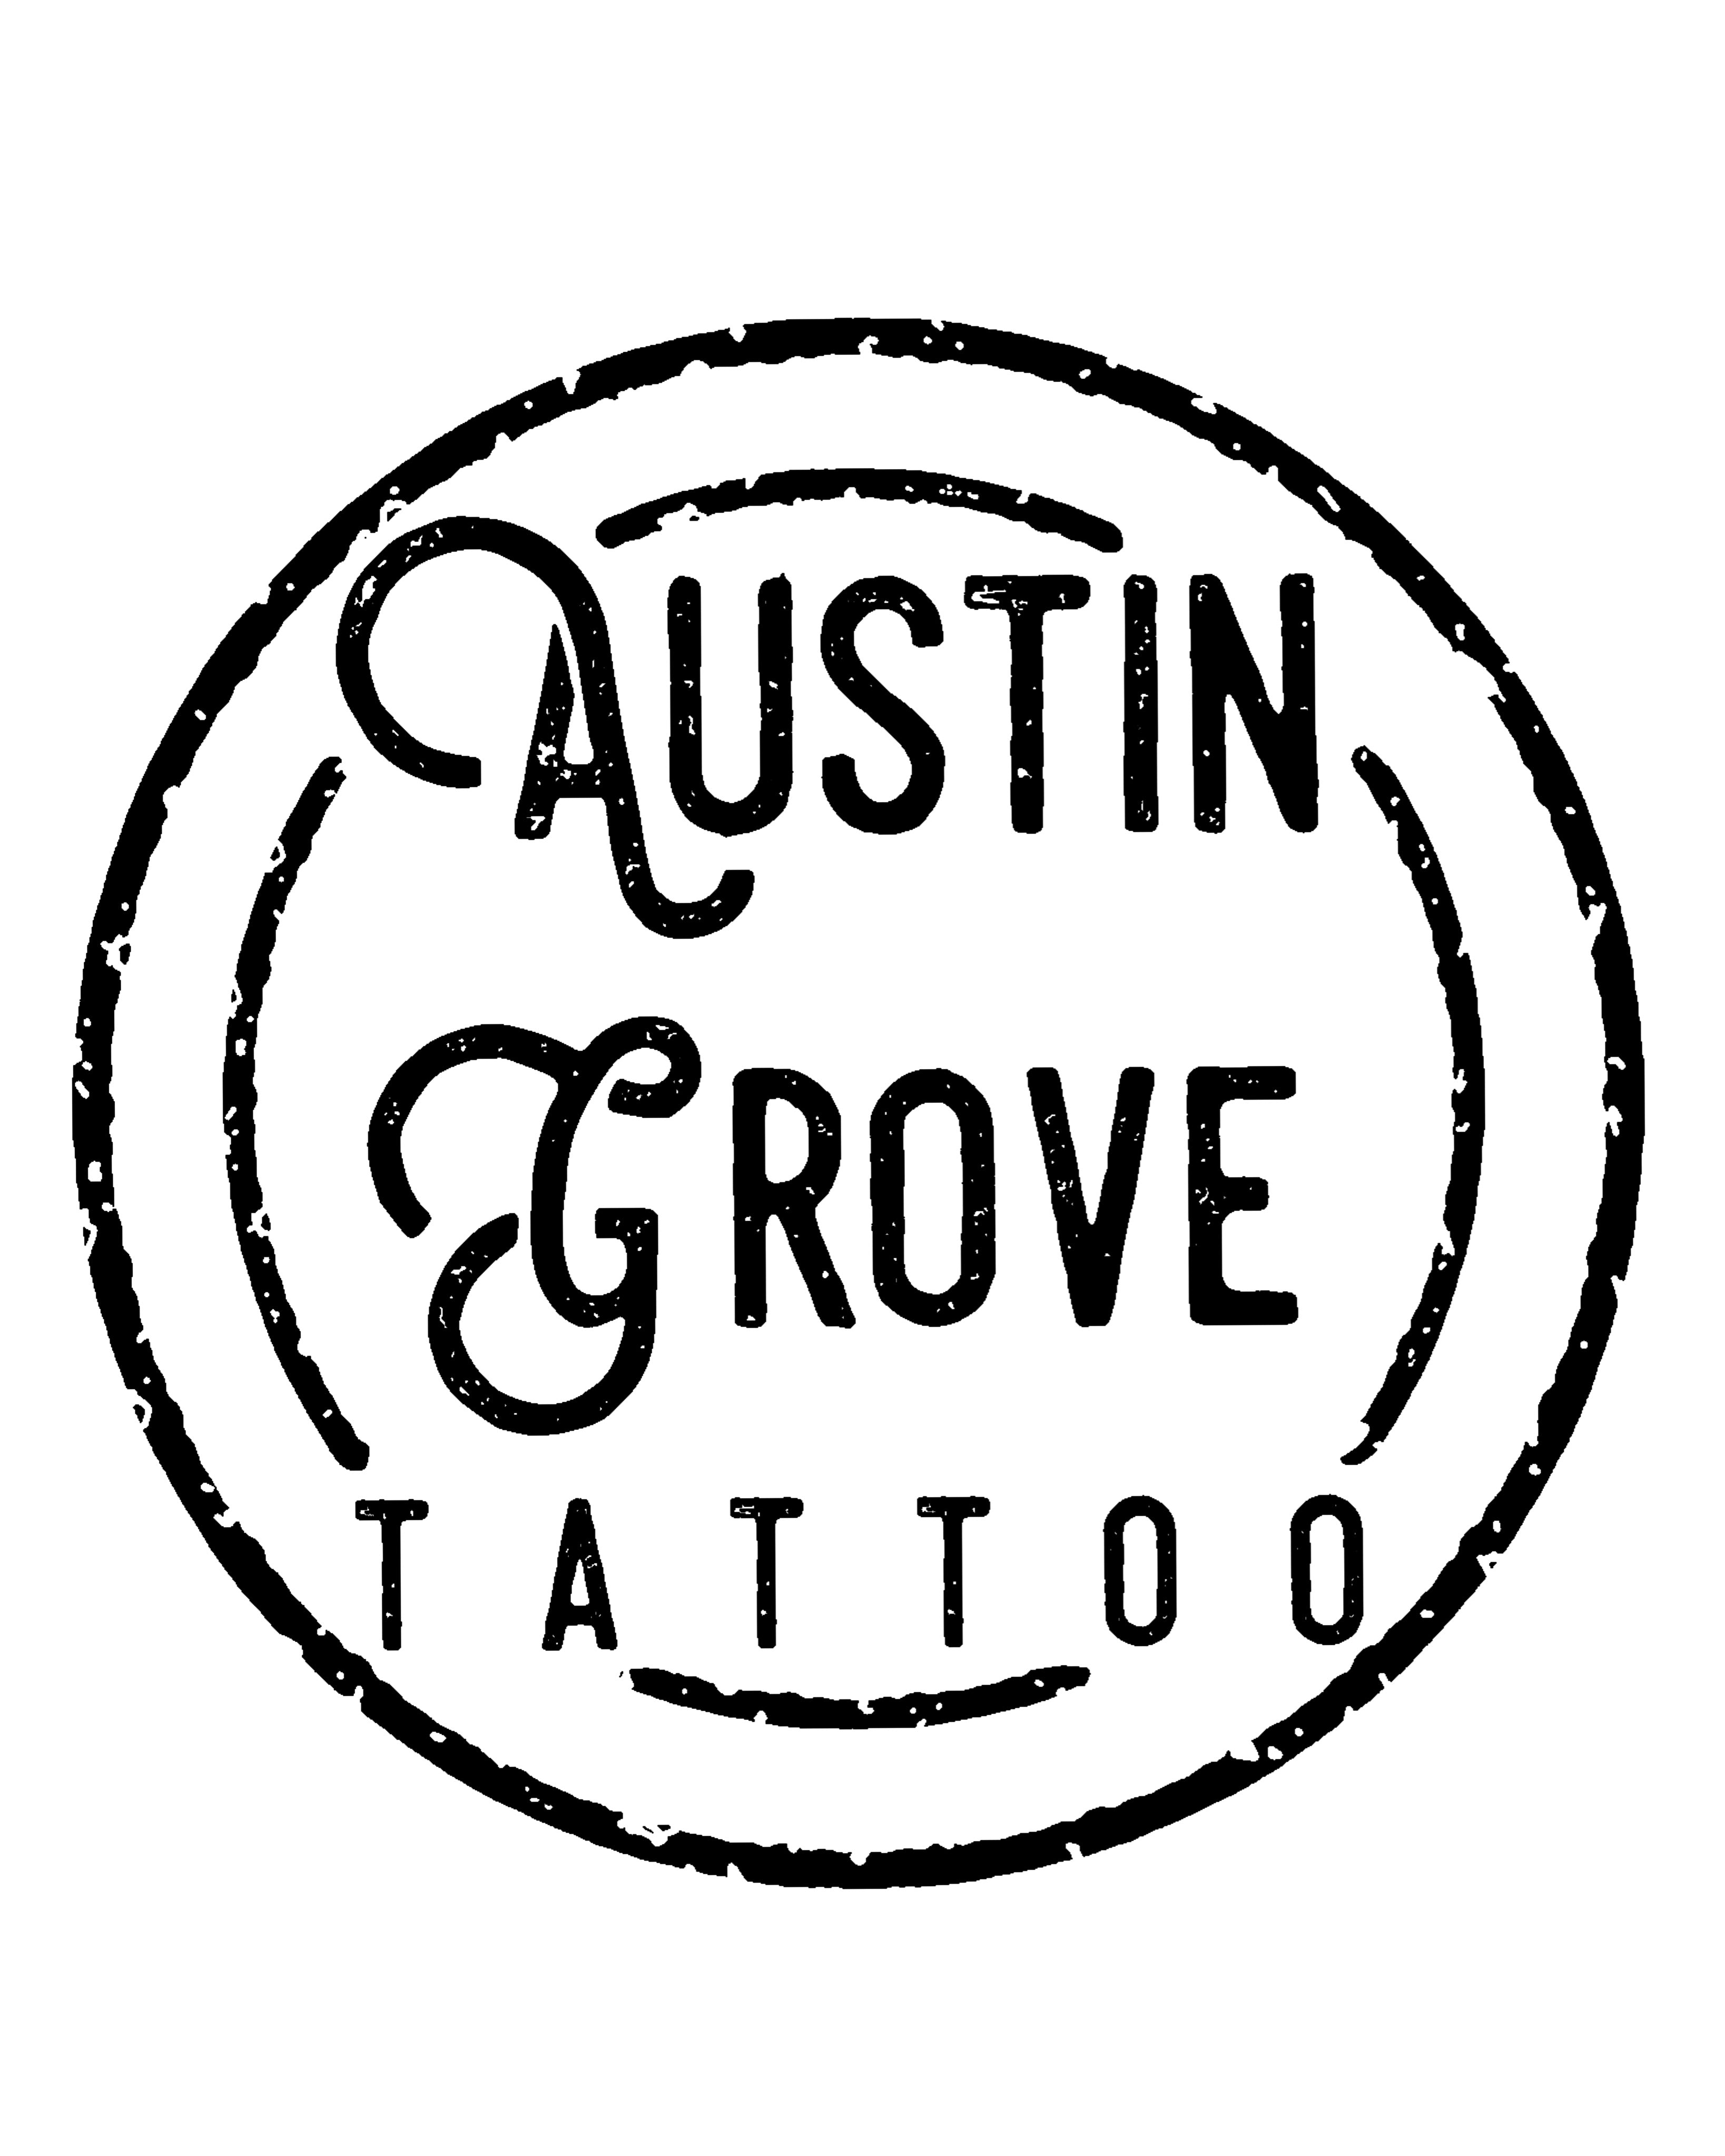 Where to get a Friday the 13th tattoo in Austin